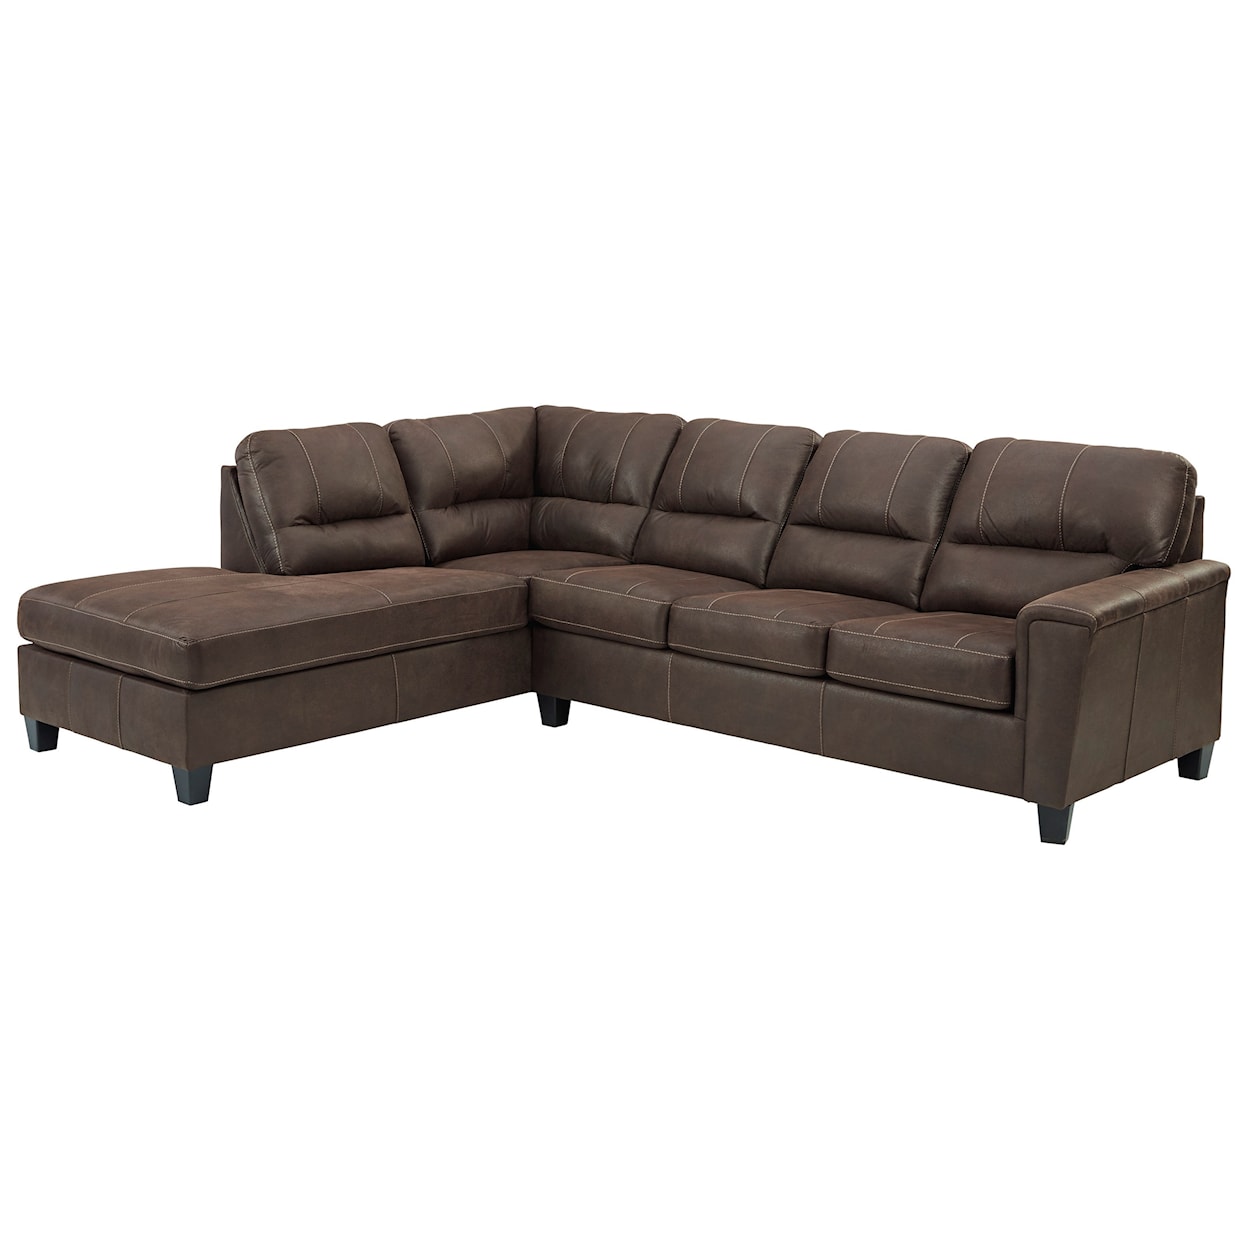 Ashley Furniture Signature Design Navi 2-Piece Sectional with Left Chaise